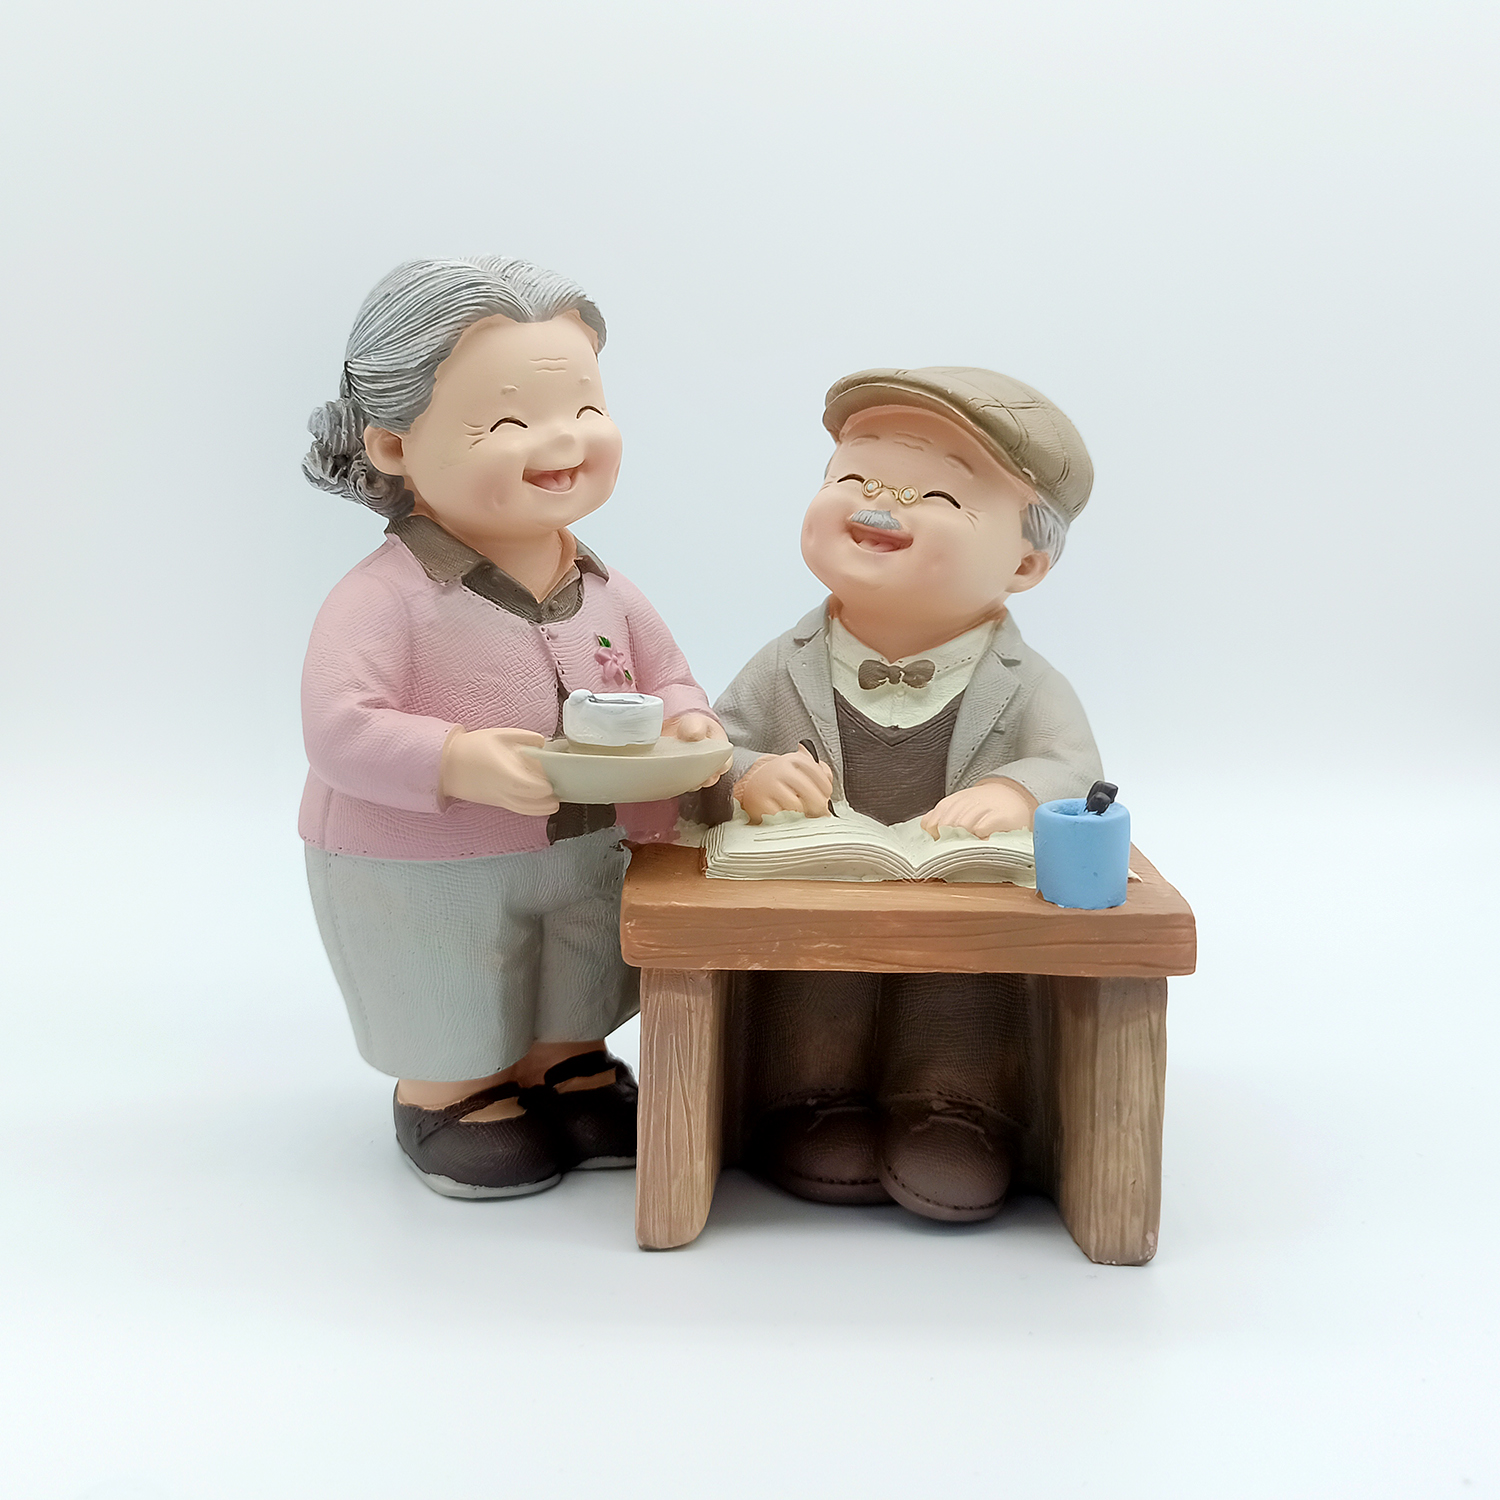 Cute Grandparents Celebrating, Lovely Couple Figurine Gift for Old Couple